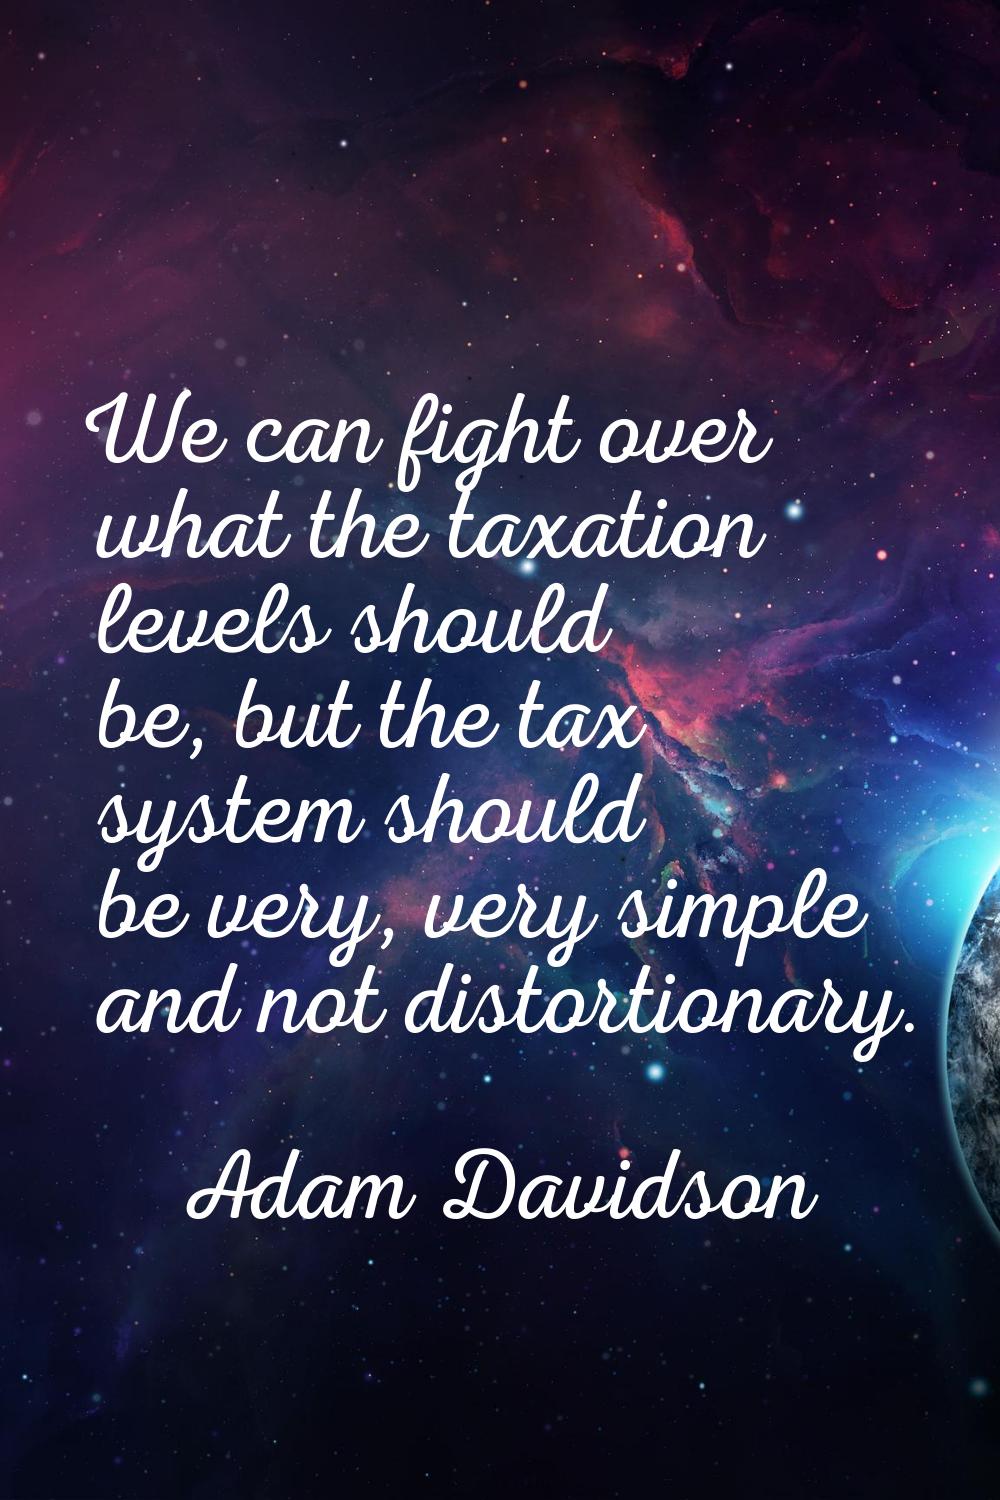 We can fight over what the taxation levels should be, but the tax system should be very, very simpl